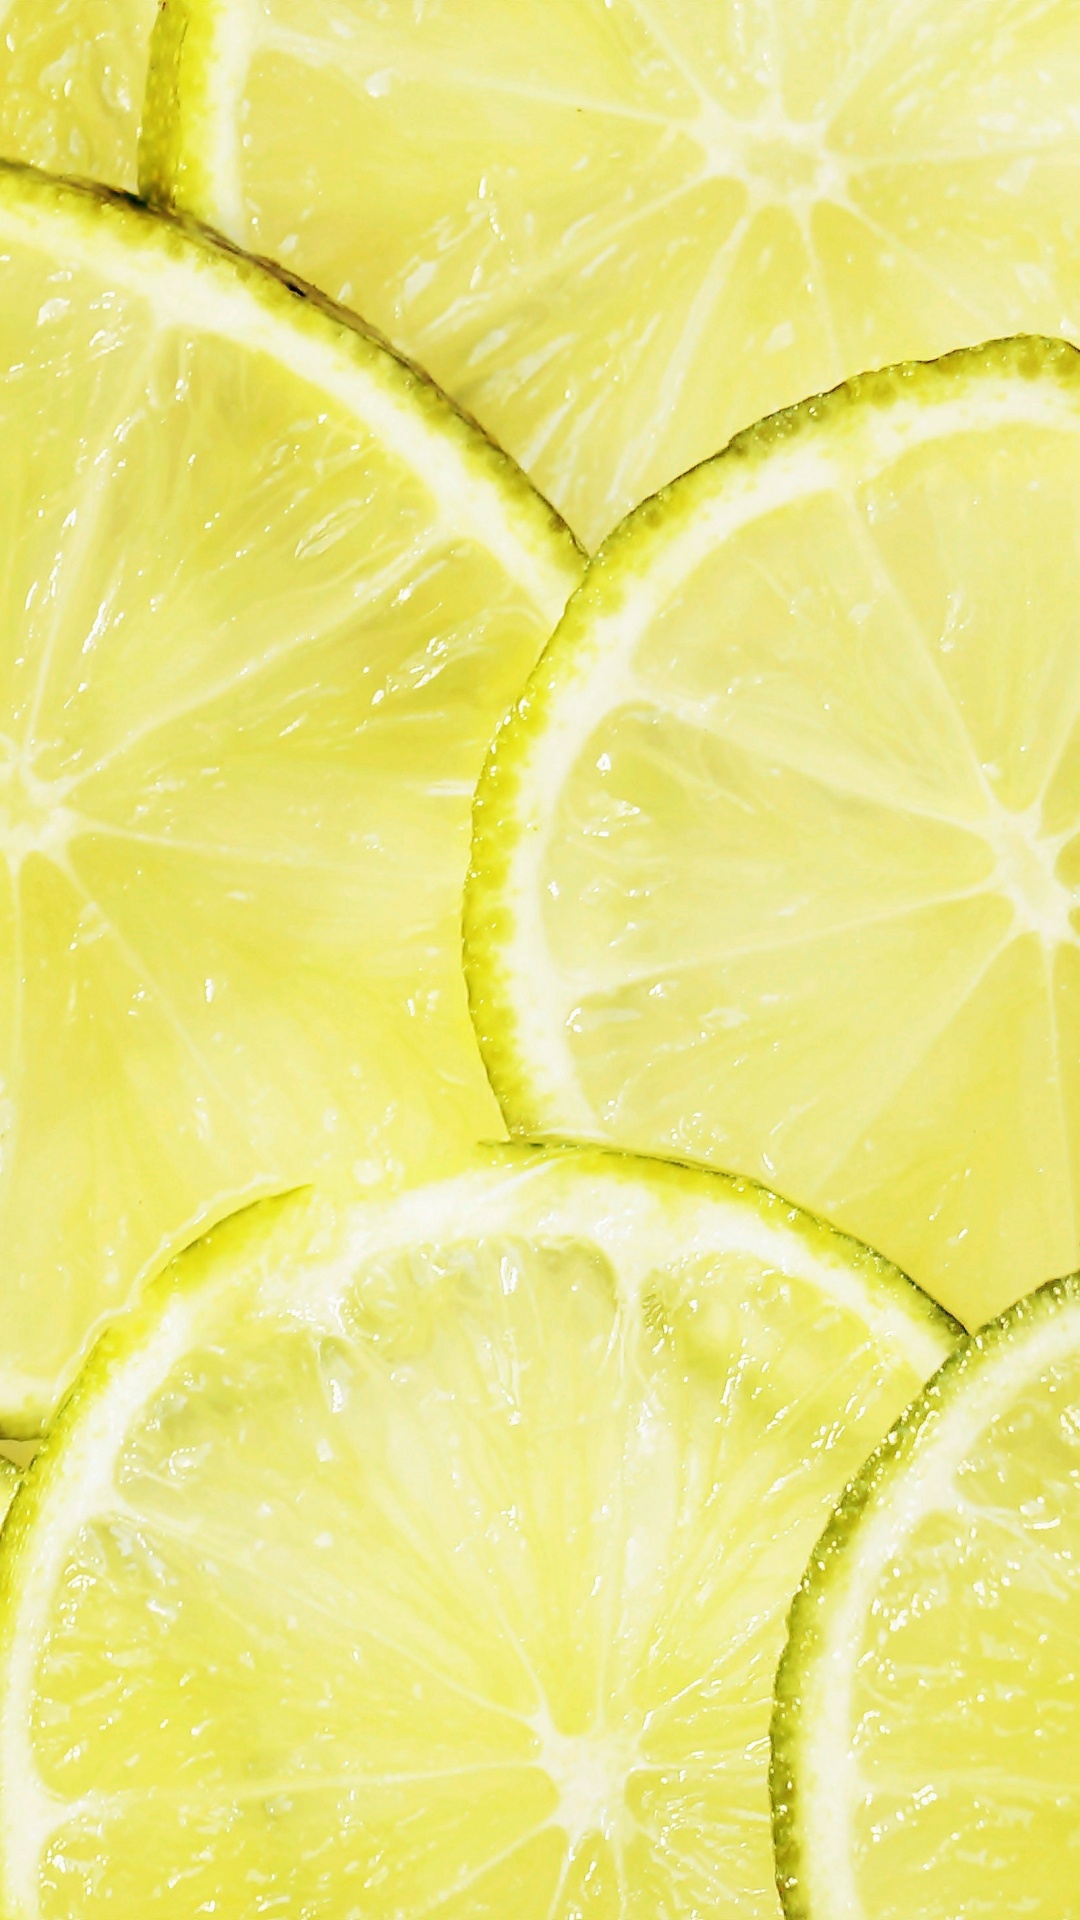 Yellow Lemon Fruit With Water Droplets. Wallpaper in 1080x1920 Resolution